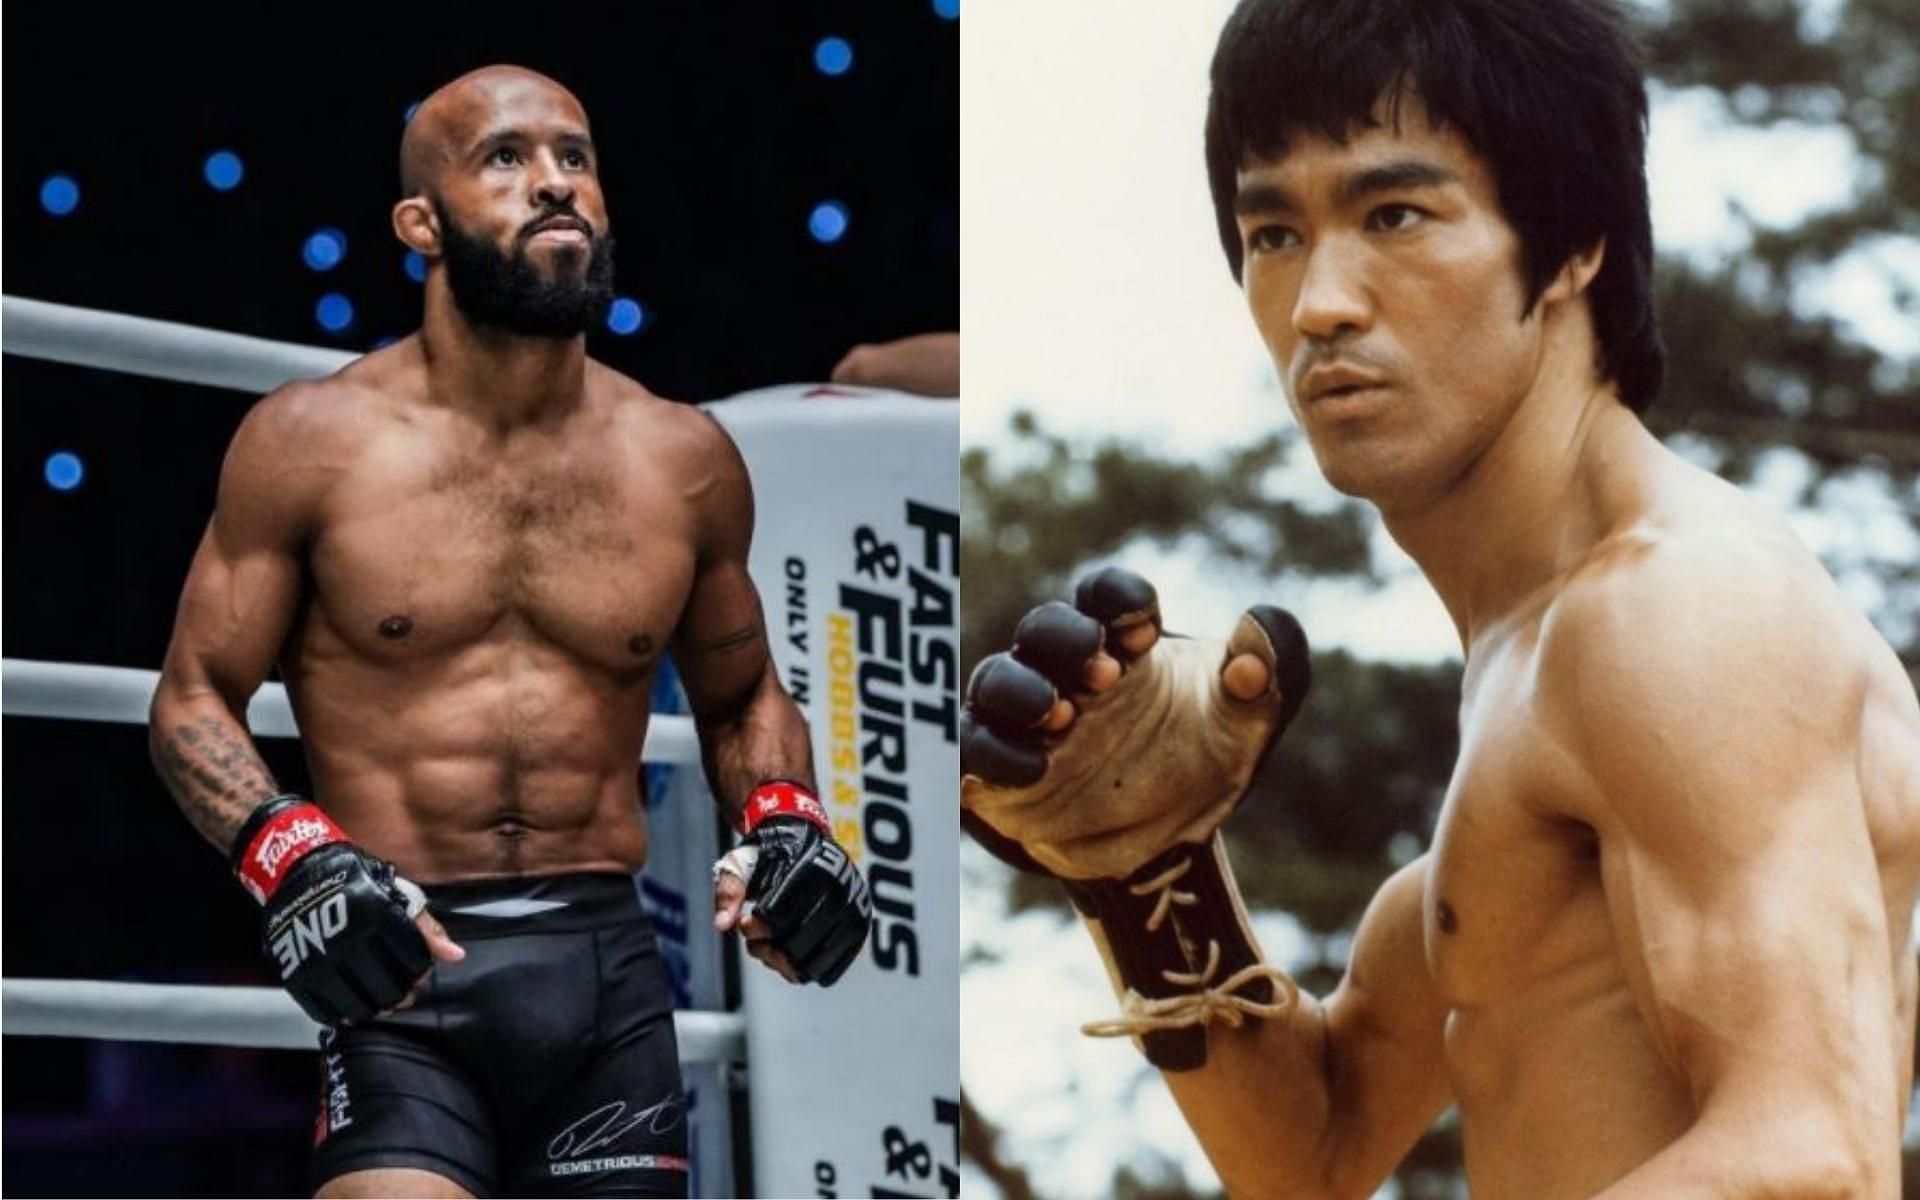 ONE Championship flyweight Grand Prix champion Demetrious Johnson and martial arts legend Bruce Lee (Images Credits: @mighty and @brucelee on Instagram)